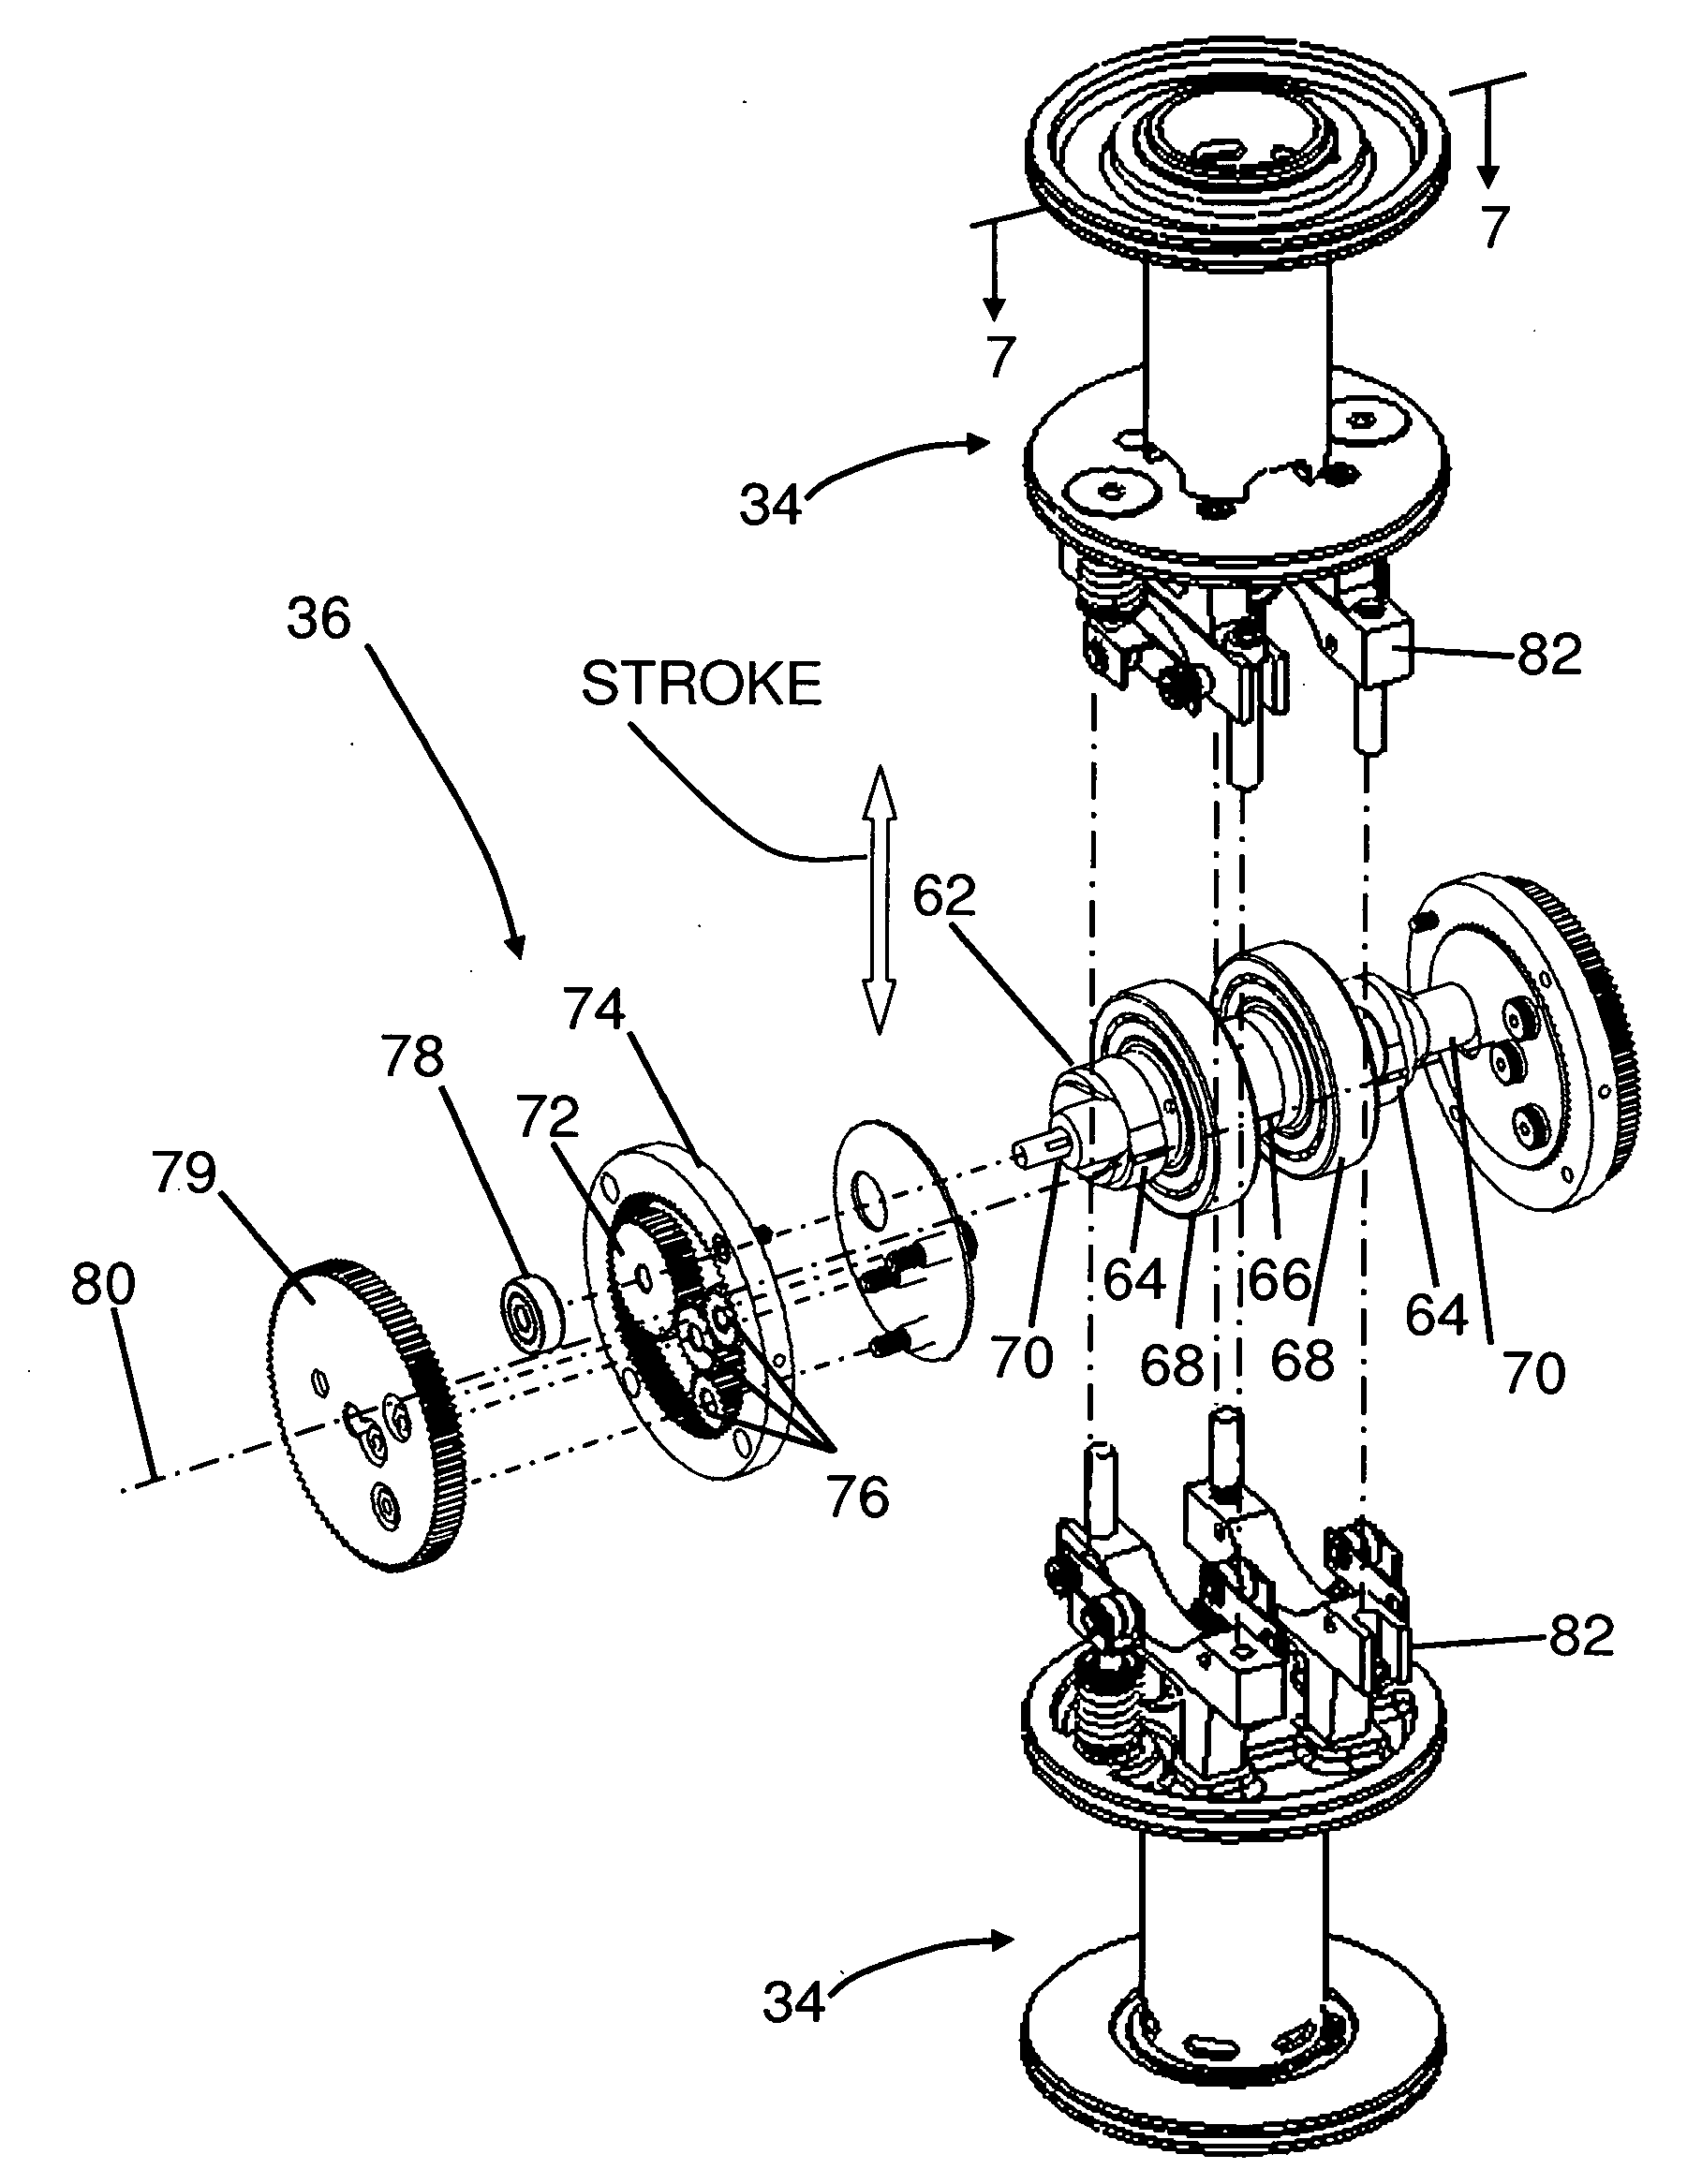 Two-stroke Opposed Cylinder Internal Combustion Engine with Integrated Positive Displacement Supercharger and Regenerator.